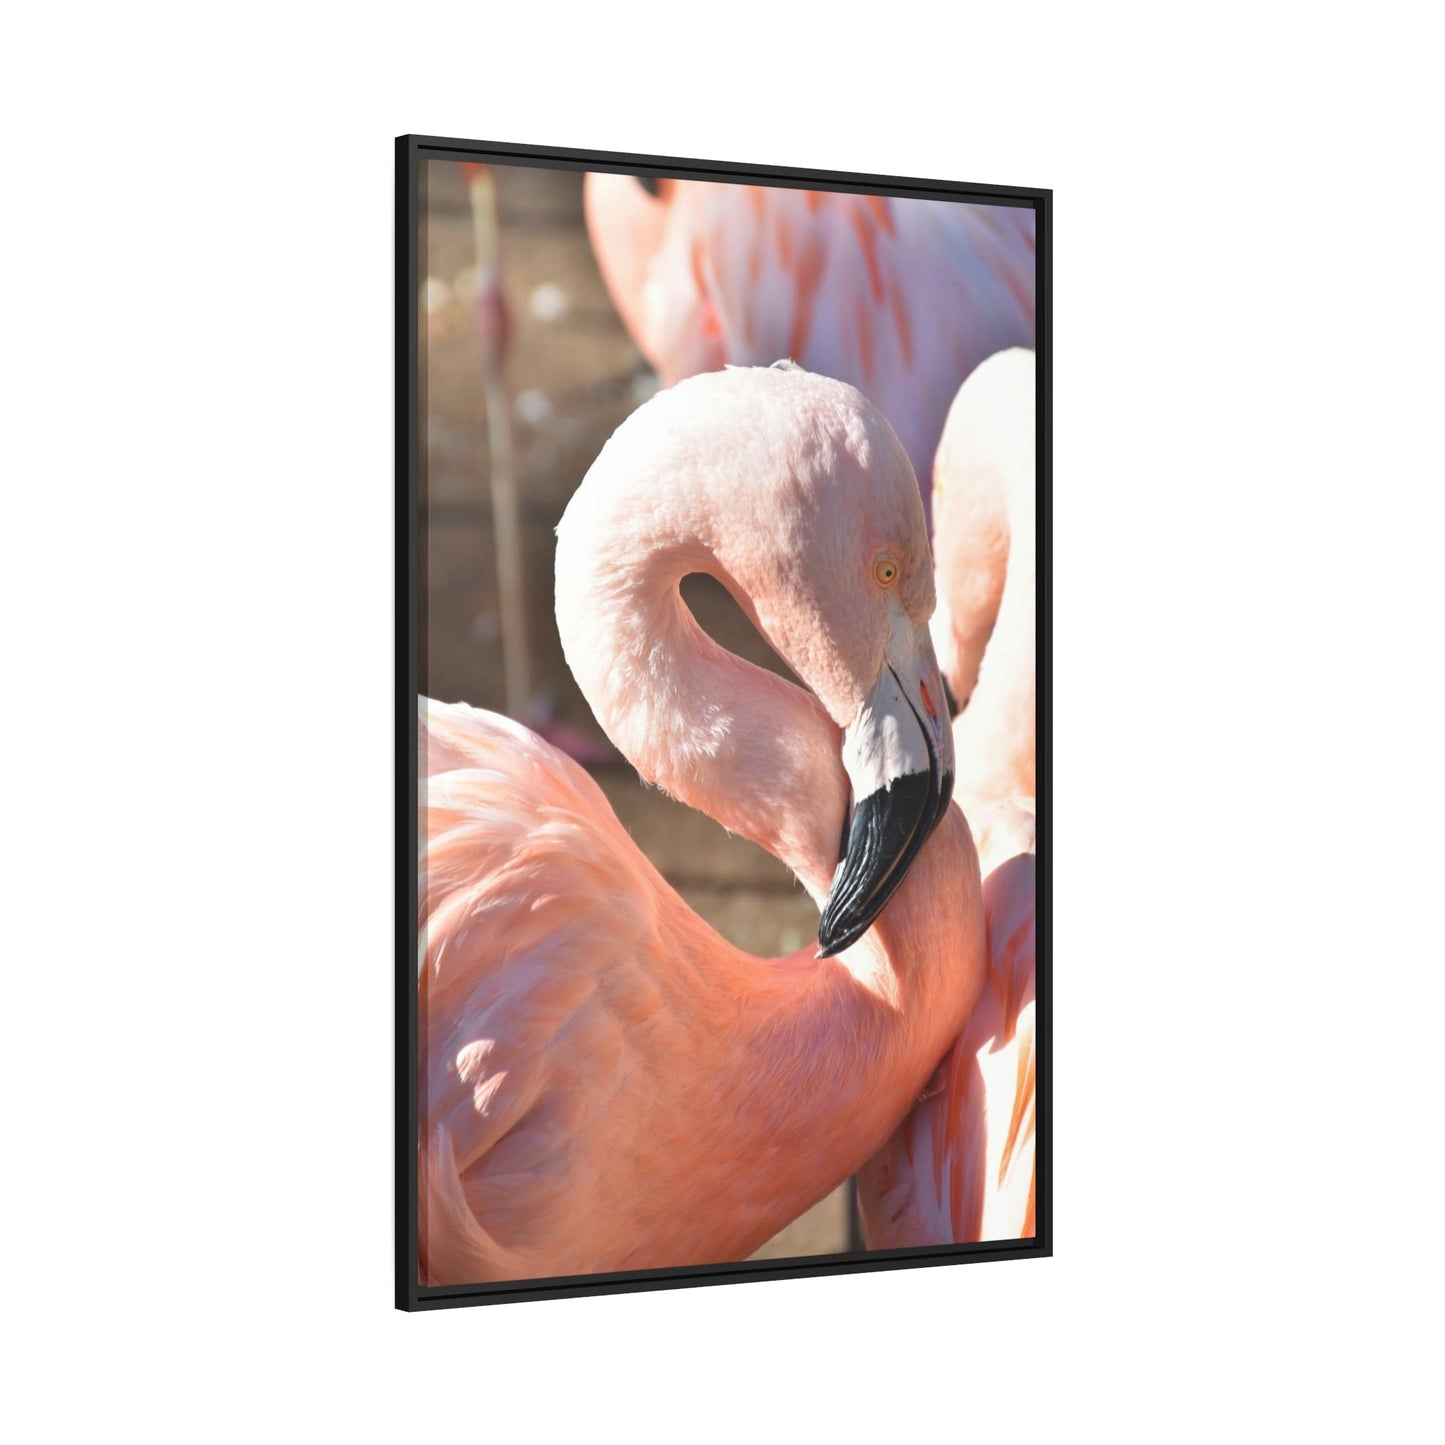 Flamingo Reflections: A Canvas of Stillness and Serenity